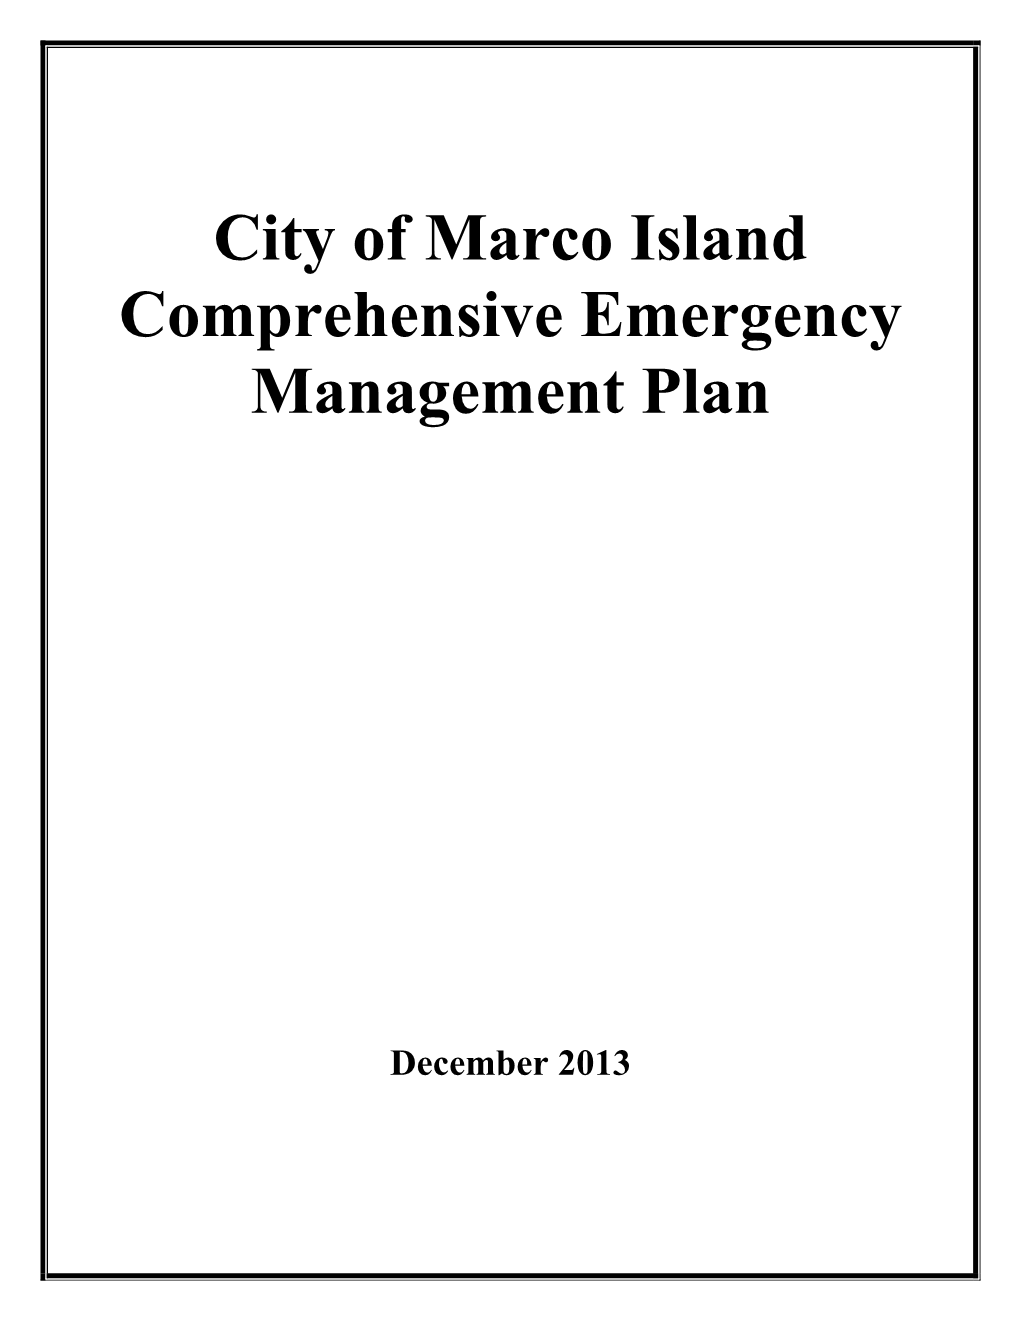 City of Marco Island Comprehensive Emergency Management Plan